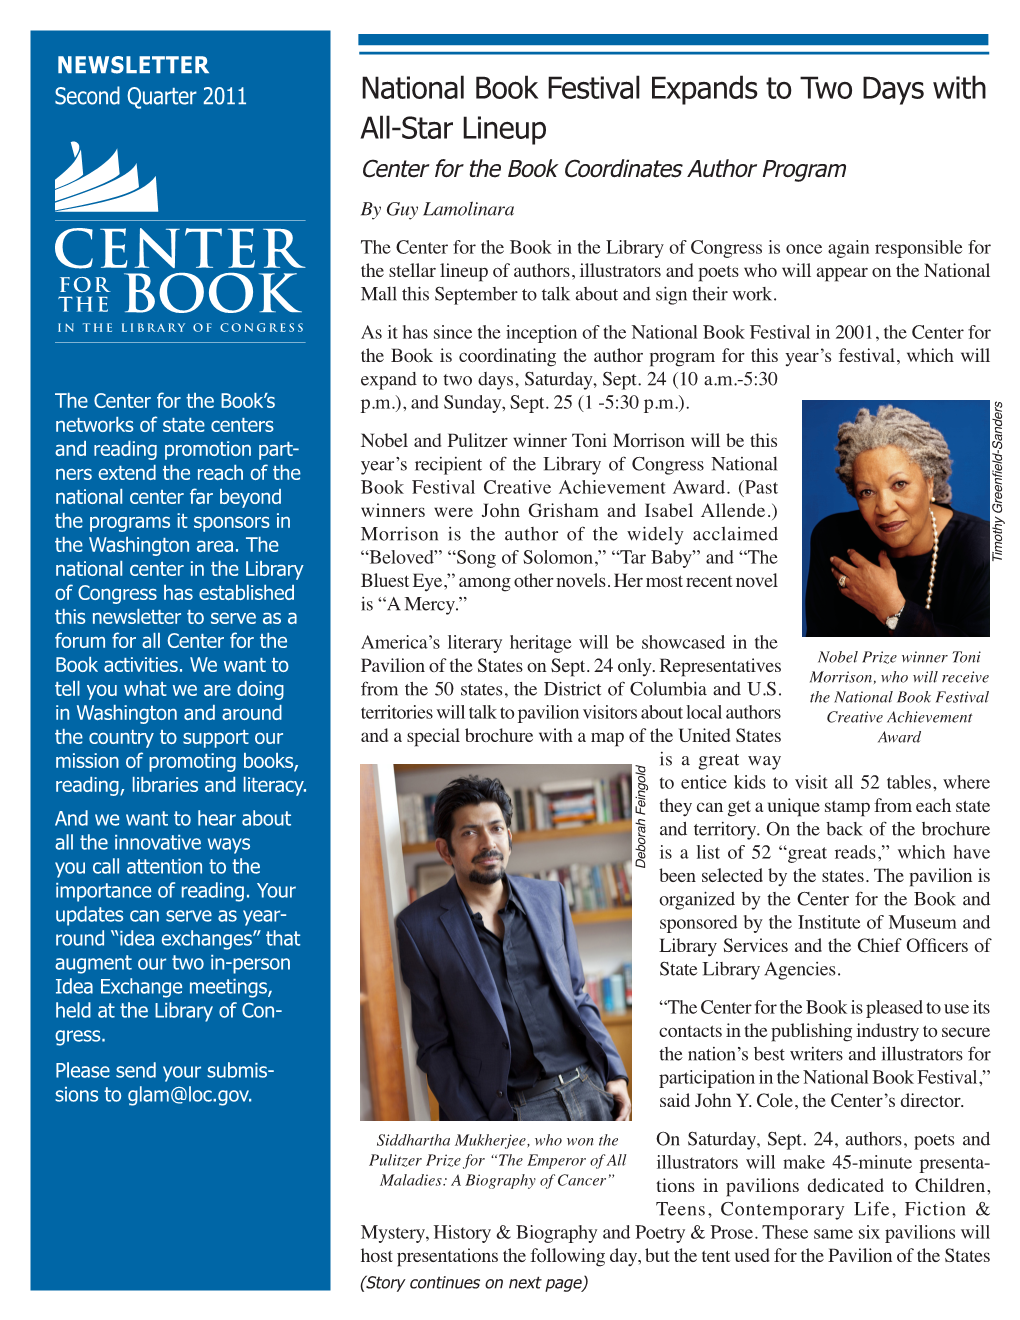 National Book Festival Expands to Two Days with All-Star Lineup Center for the Book Coordinates Author Program